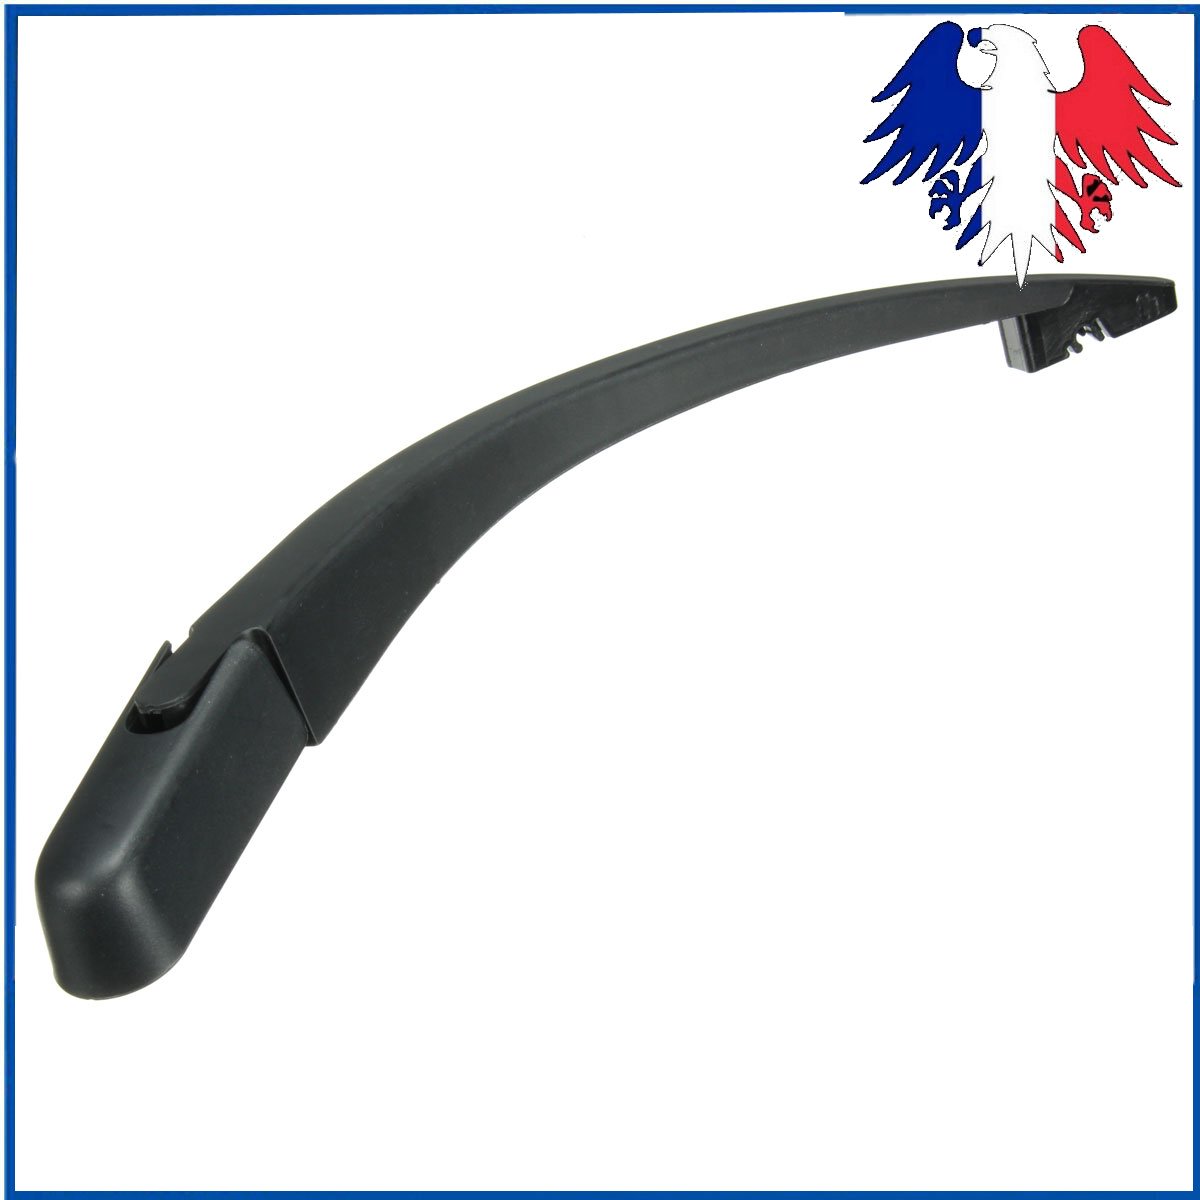 BRAS ESSUIE-GLACE ARRIERE COMPLET PEUGEOT 107 2005-2012 300 mm NEUF !.!